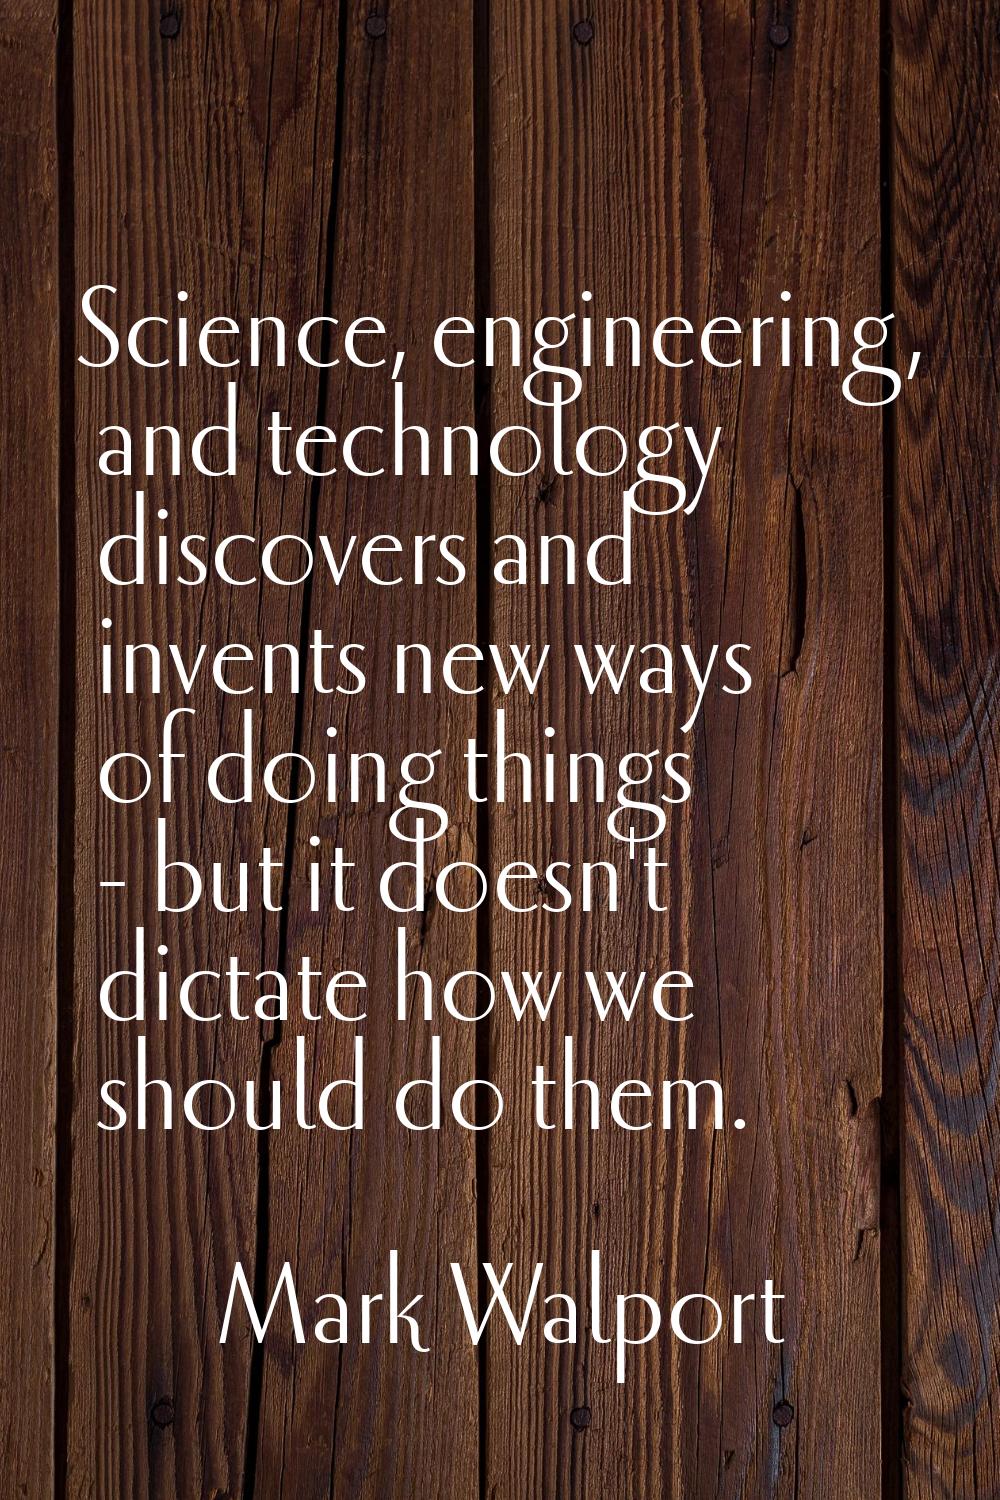 Science, engineering, and technology discovers and invents new ways of doing things - but it doesn'